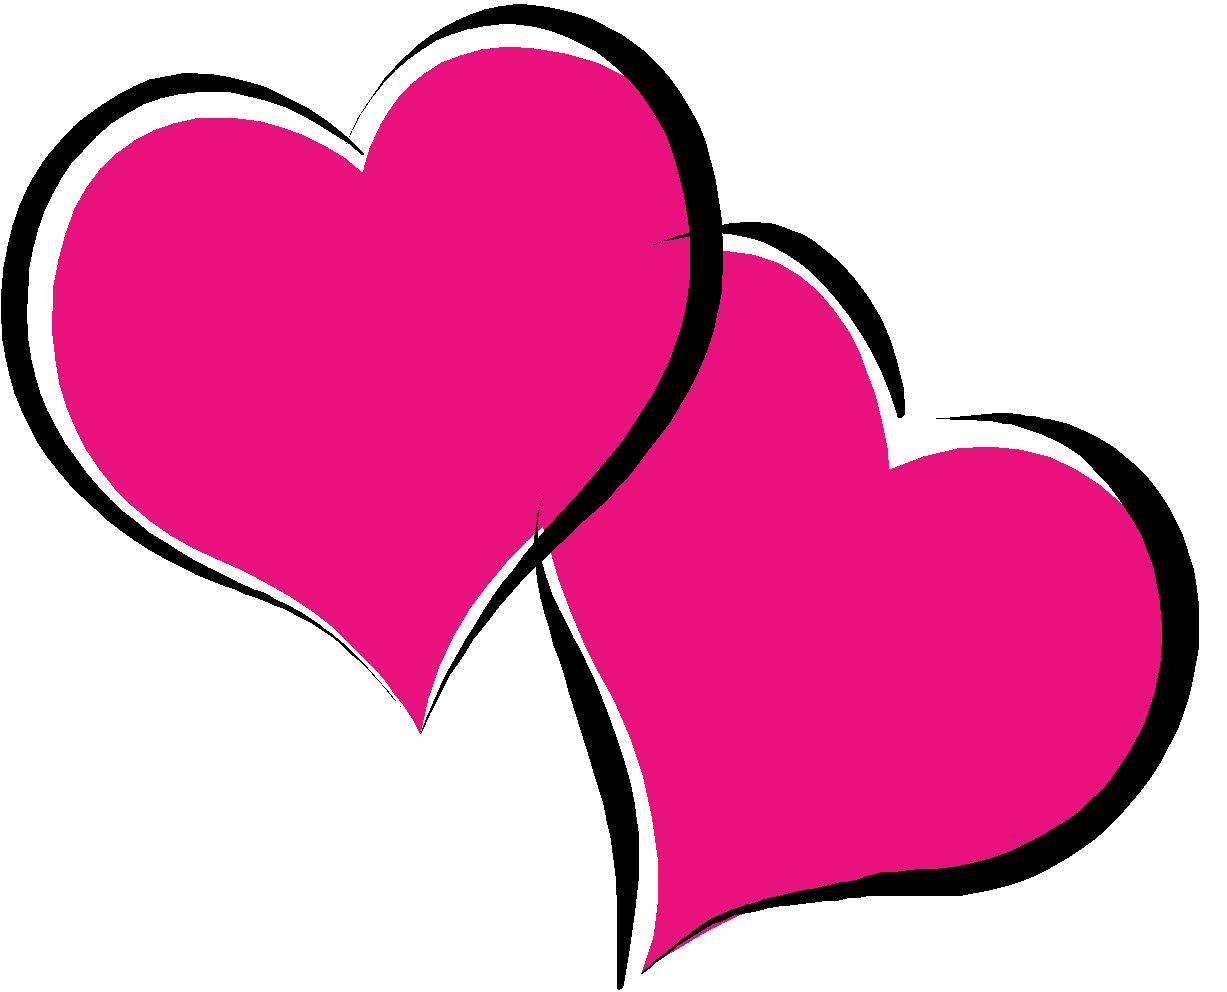 Hearts Clip Art Banner | Clipart library - Free Clipart Images